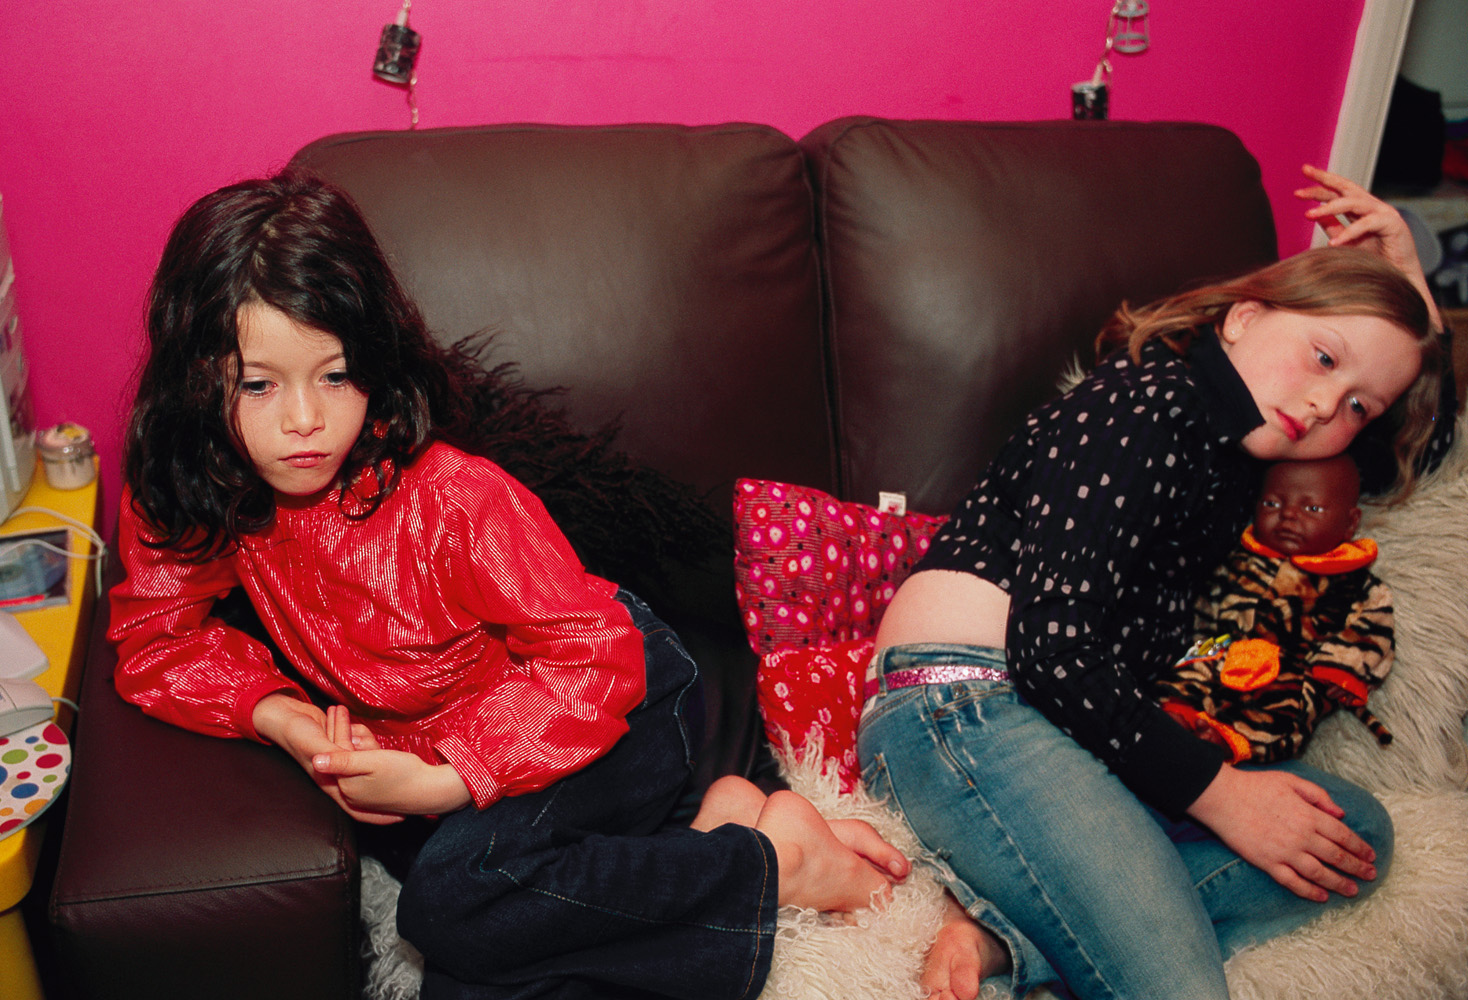 The girls on the sofa, London, 2007